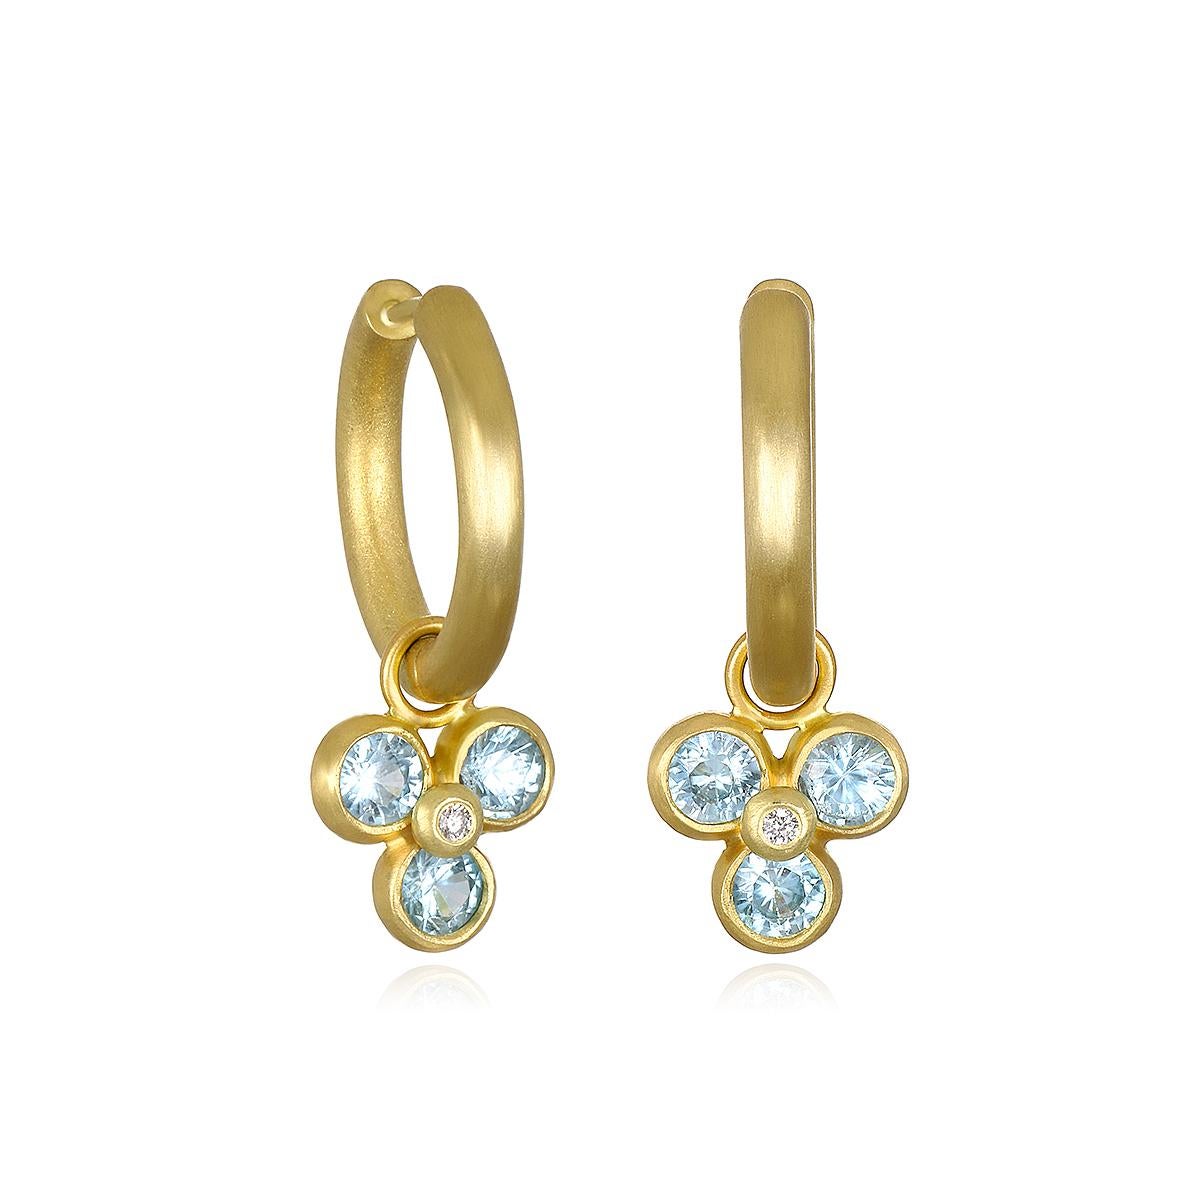 Faye Kim's 18 Karat Gold Hinged Burnished Diamond Hoops with Detachable Triple Blue Zircon Drops - 
The hoops can be worn separately from the drops or with the diamonds in the front or reversed to show the gold side. The drops can be attached to